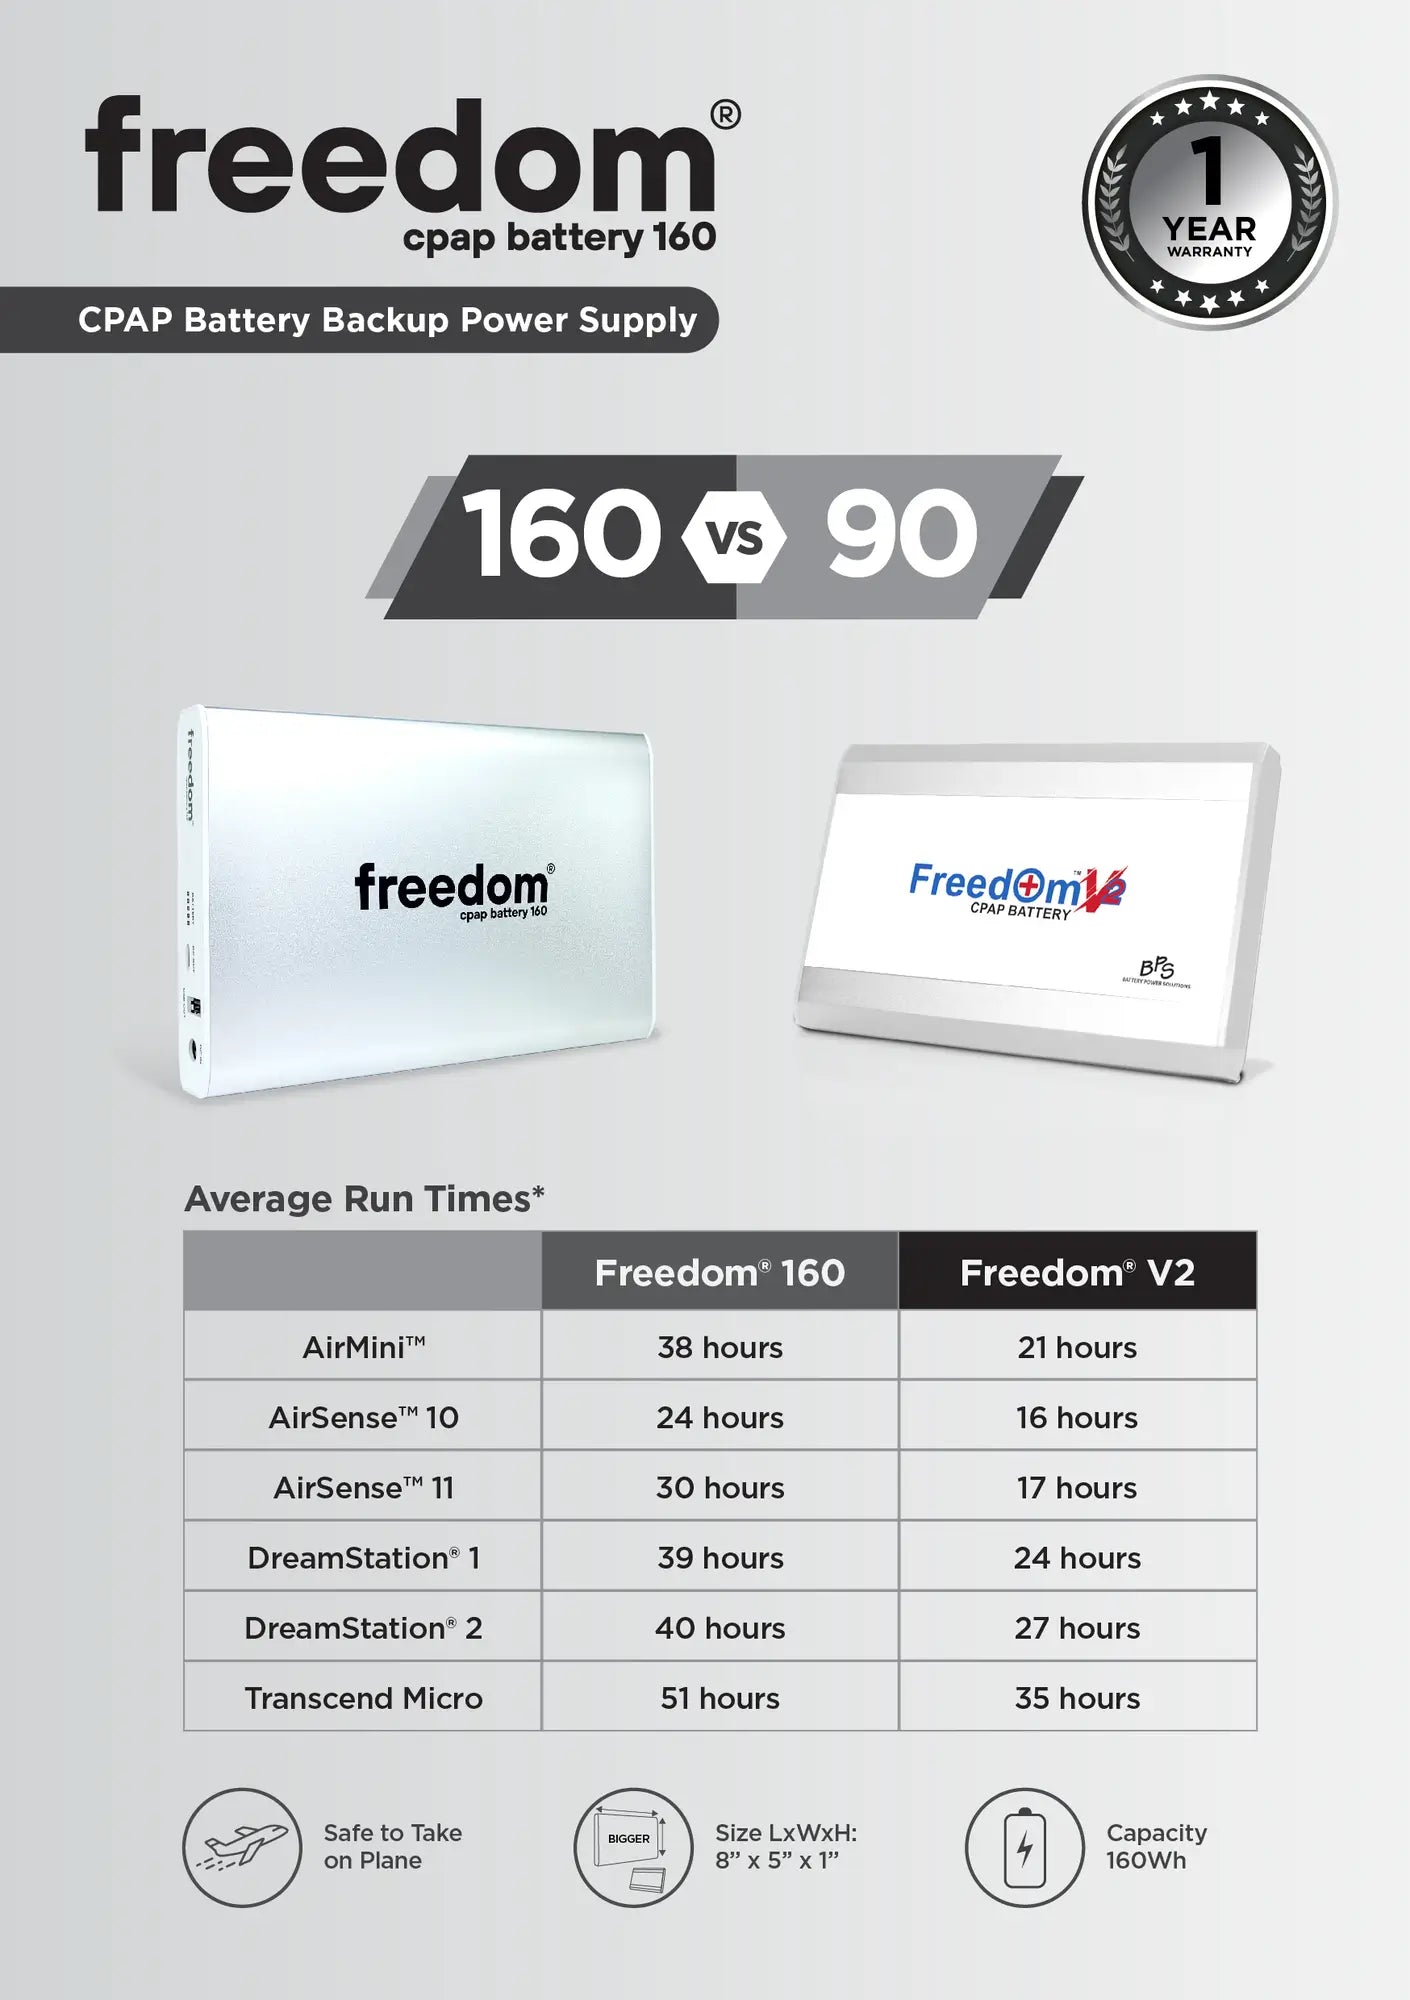 Side-by-side comparison of the Freedom 160 CPAP Battery Backup and the Freedom V2